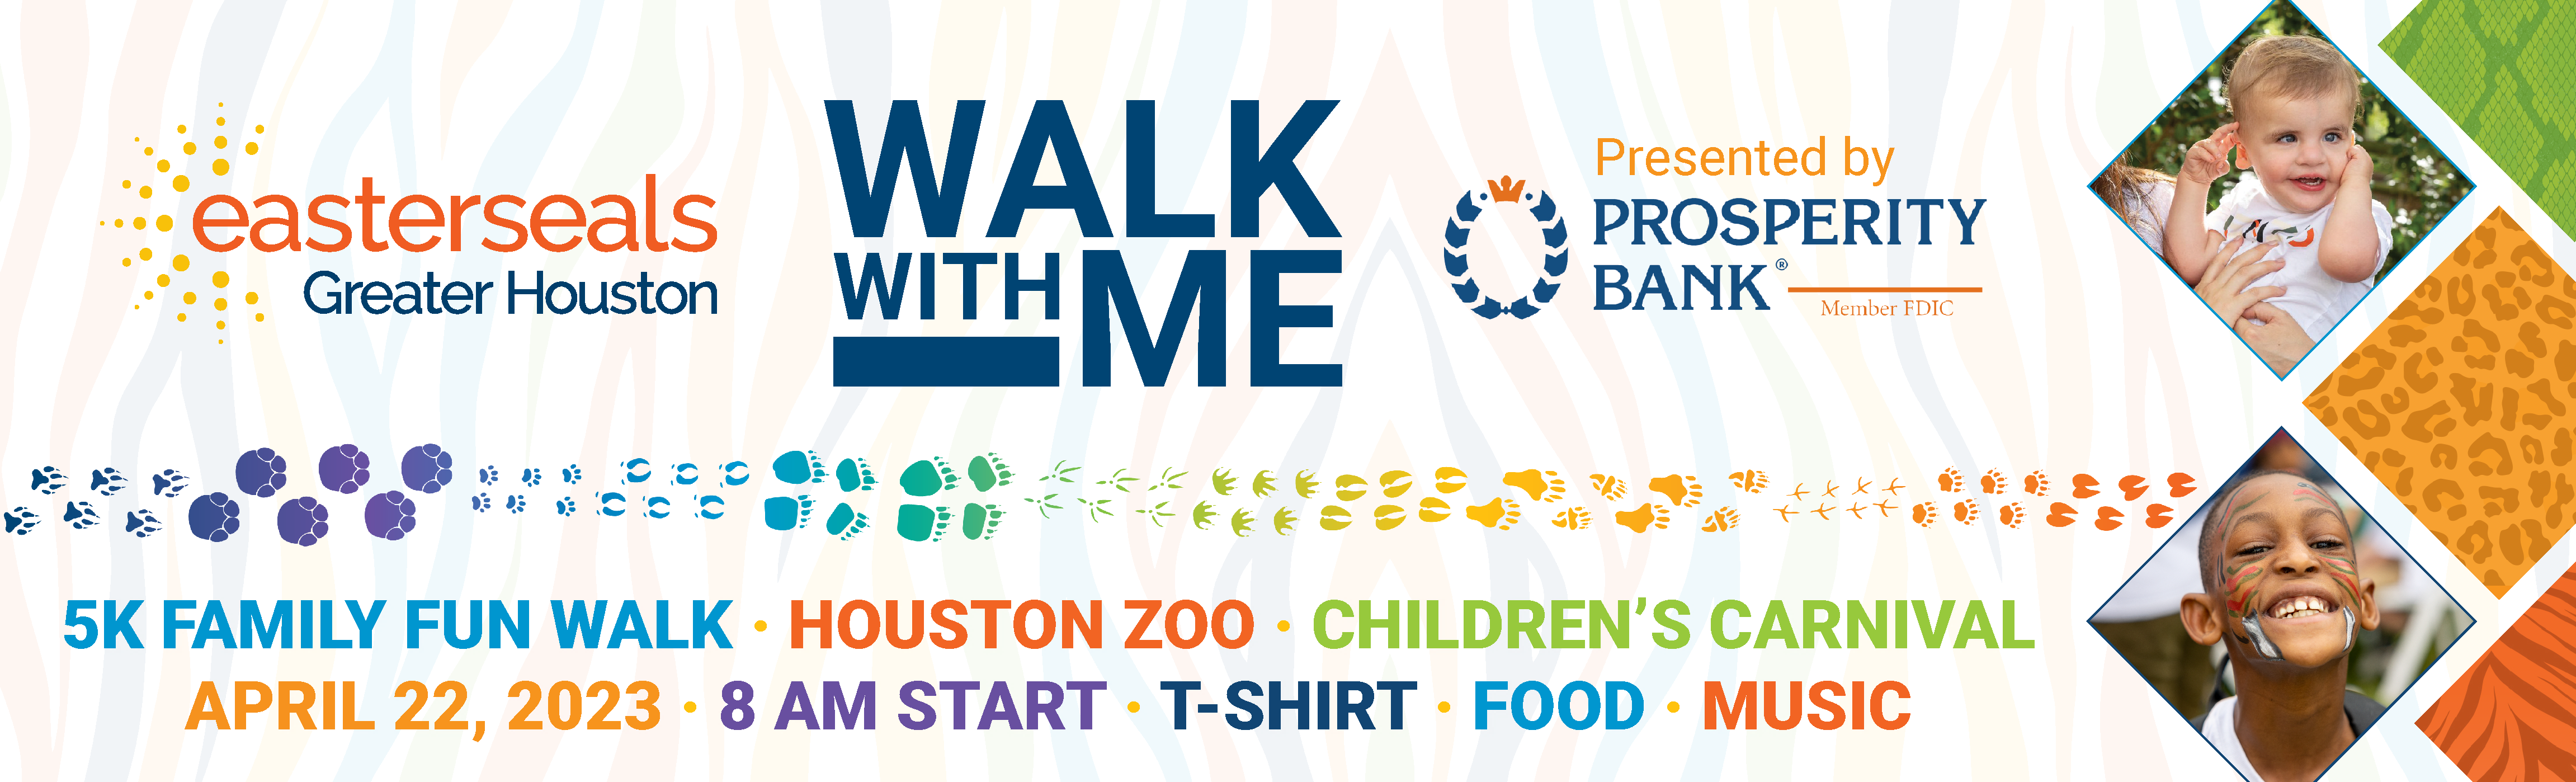 Join us for Walk With Me at the Houston Zoo on April 22, 2023